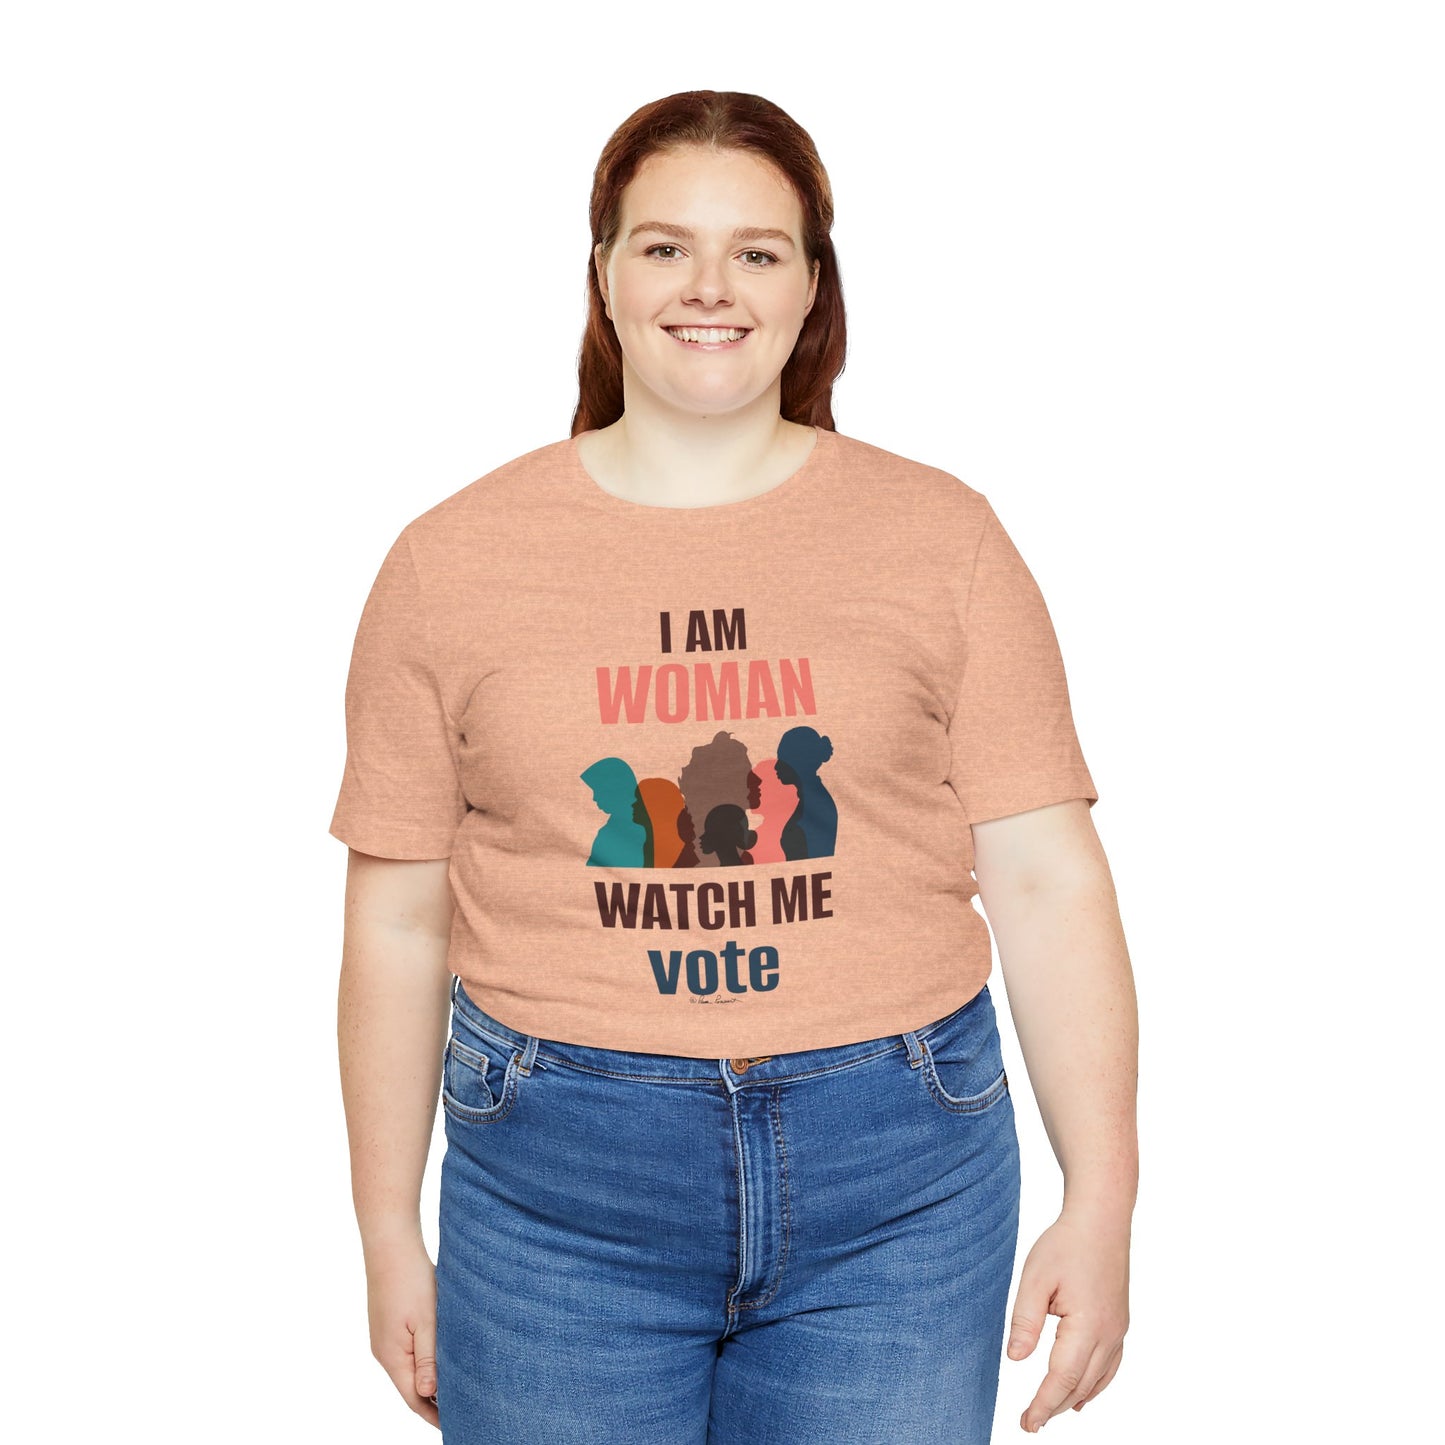 A woman in a Printify Bella + Canvas Voting Women's T-shirt with "i am woman watch me vote" and silhouette graphics, paired with blue jeans, smiling at the camera.